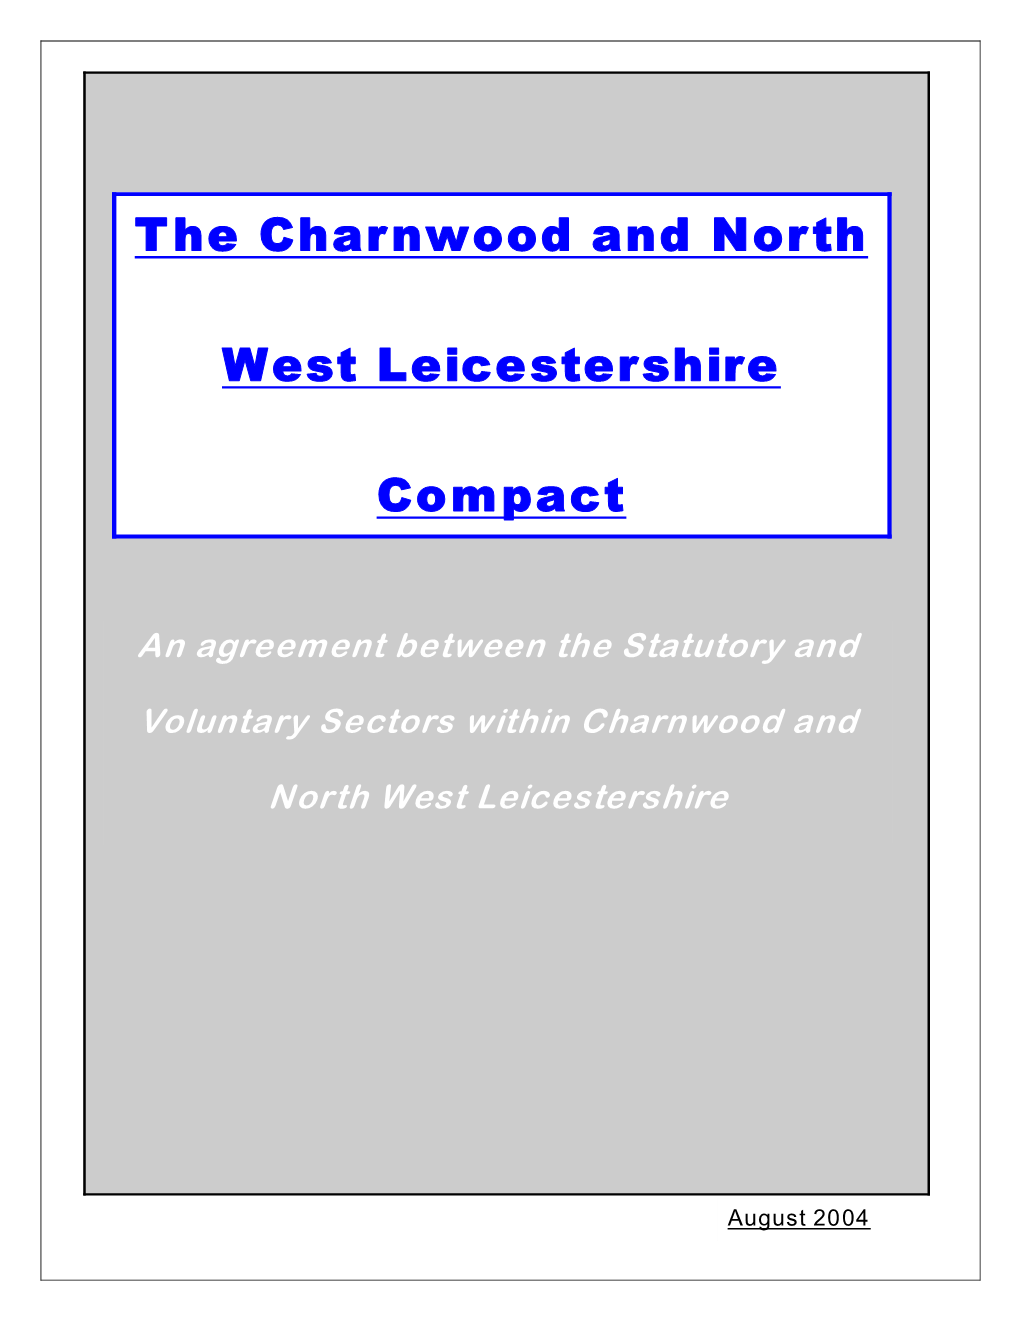 The Charnwood and North West Leicestershire Compact